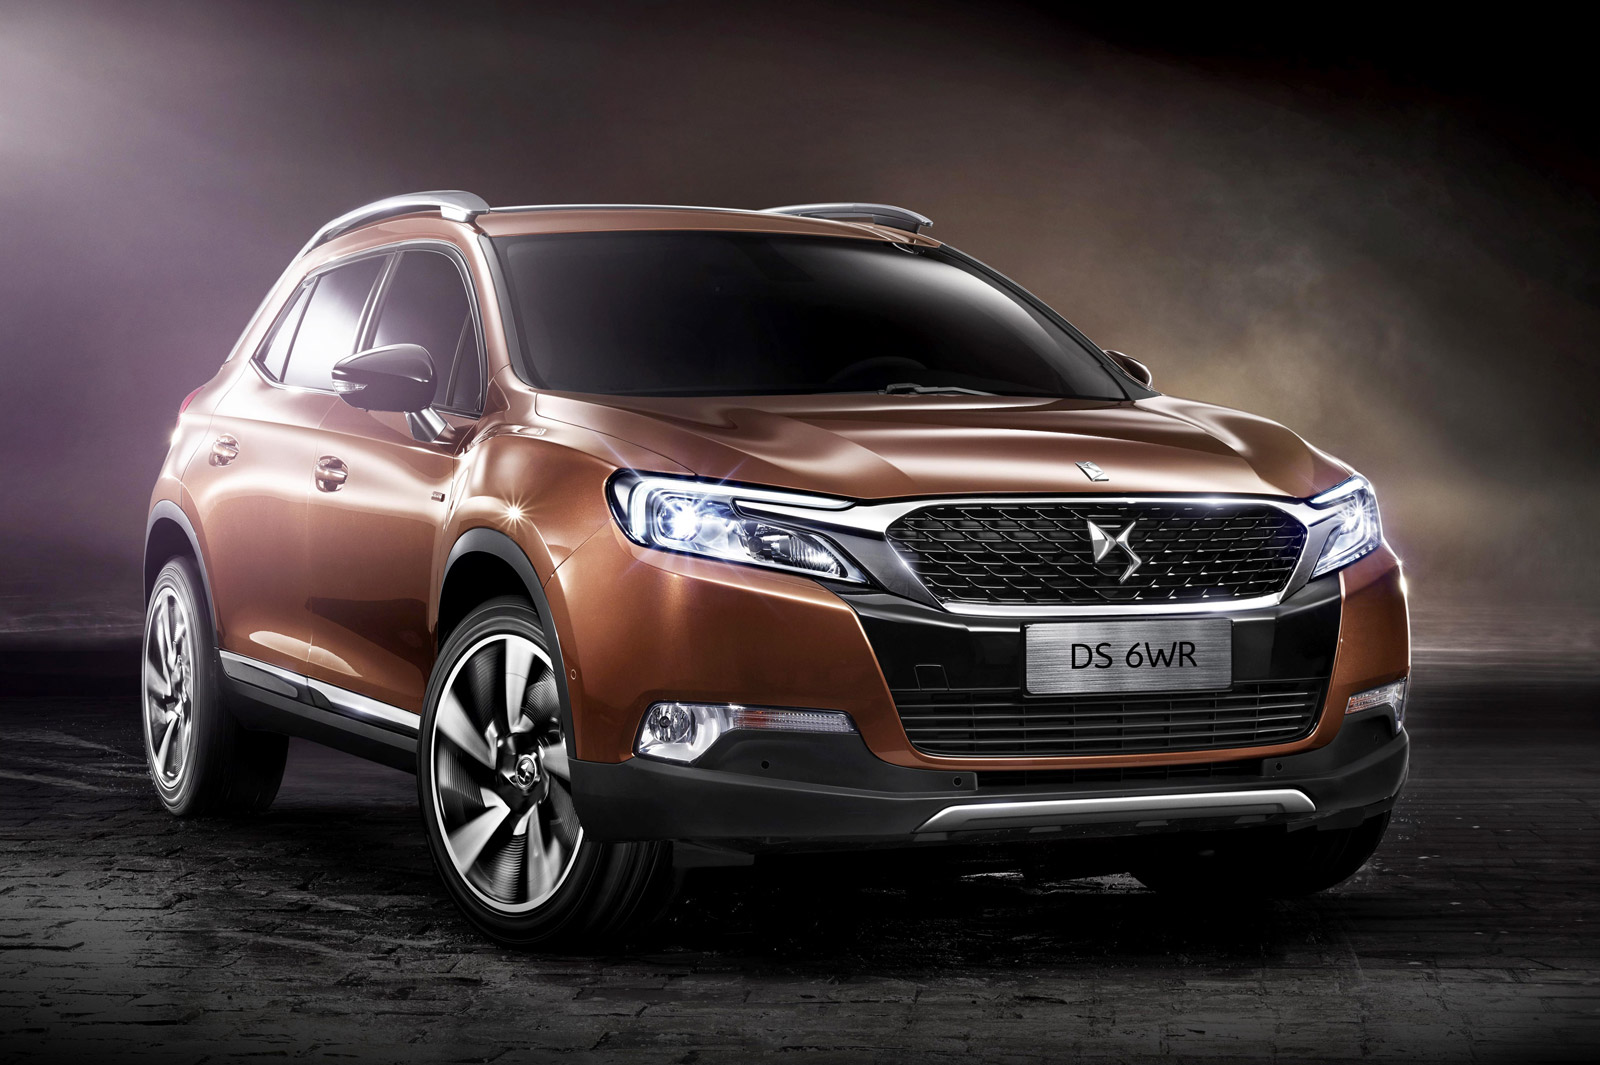 Citroën’s Luxury Brand DS Confirms 6WR SUV For Beijing Auto Show